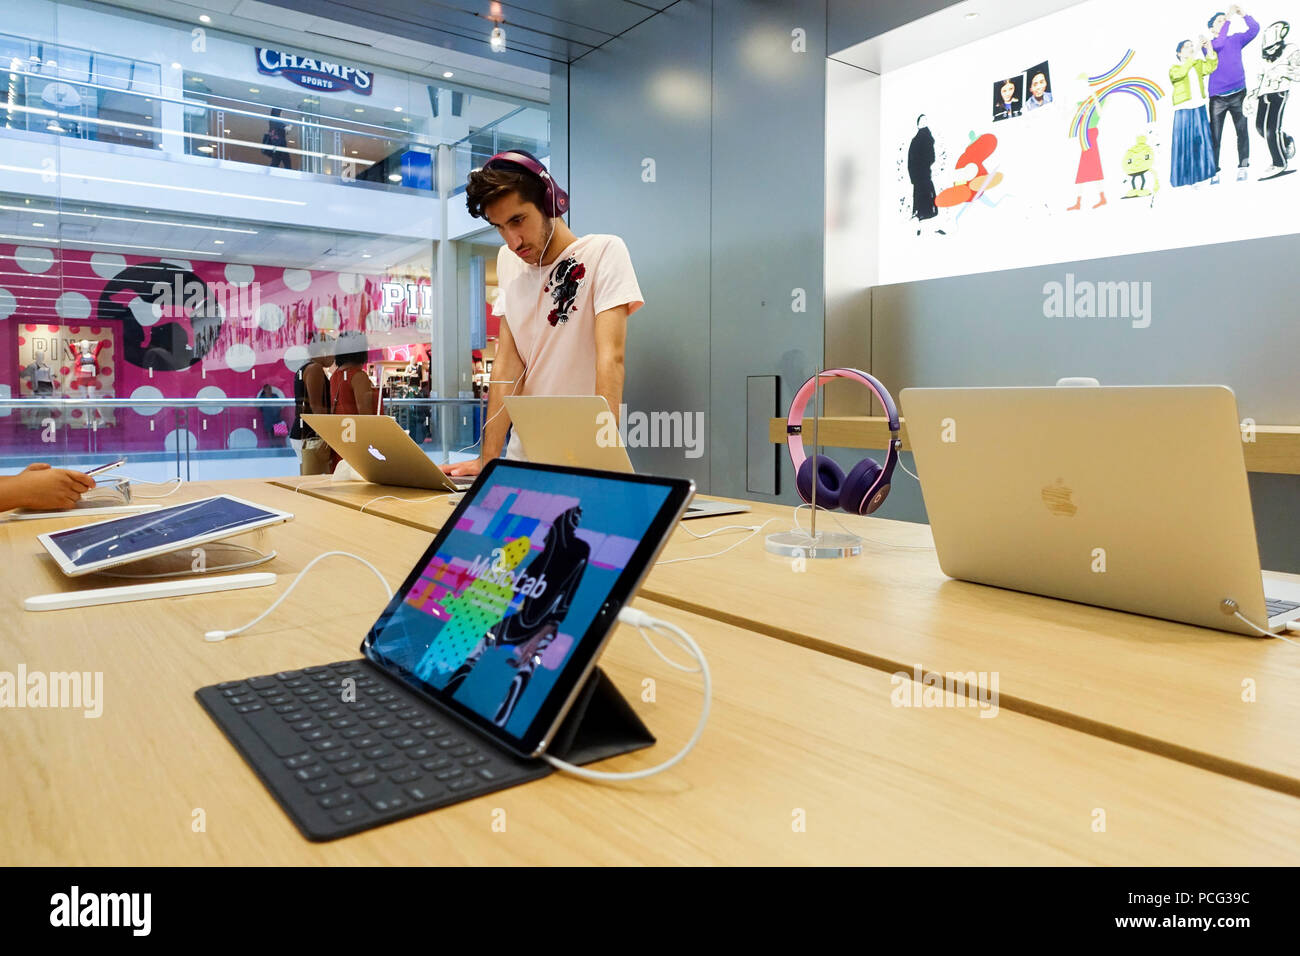 New York, USA. 2nd Aug, 2018. A customer tries a product at an Apple store in New York, the United States, Aug. 2, 2018. U.S. tech giant Apple became the first American company that saw its market cap hit 1 trillion U.S. dollars in the U.S. history after its shares rose 2.8 percent to a session high of 207.05 dollars around midday trading on Thursday. Credit: Wang Ying/Xinhua/Alamy Live News Stock Photo